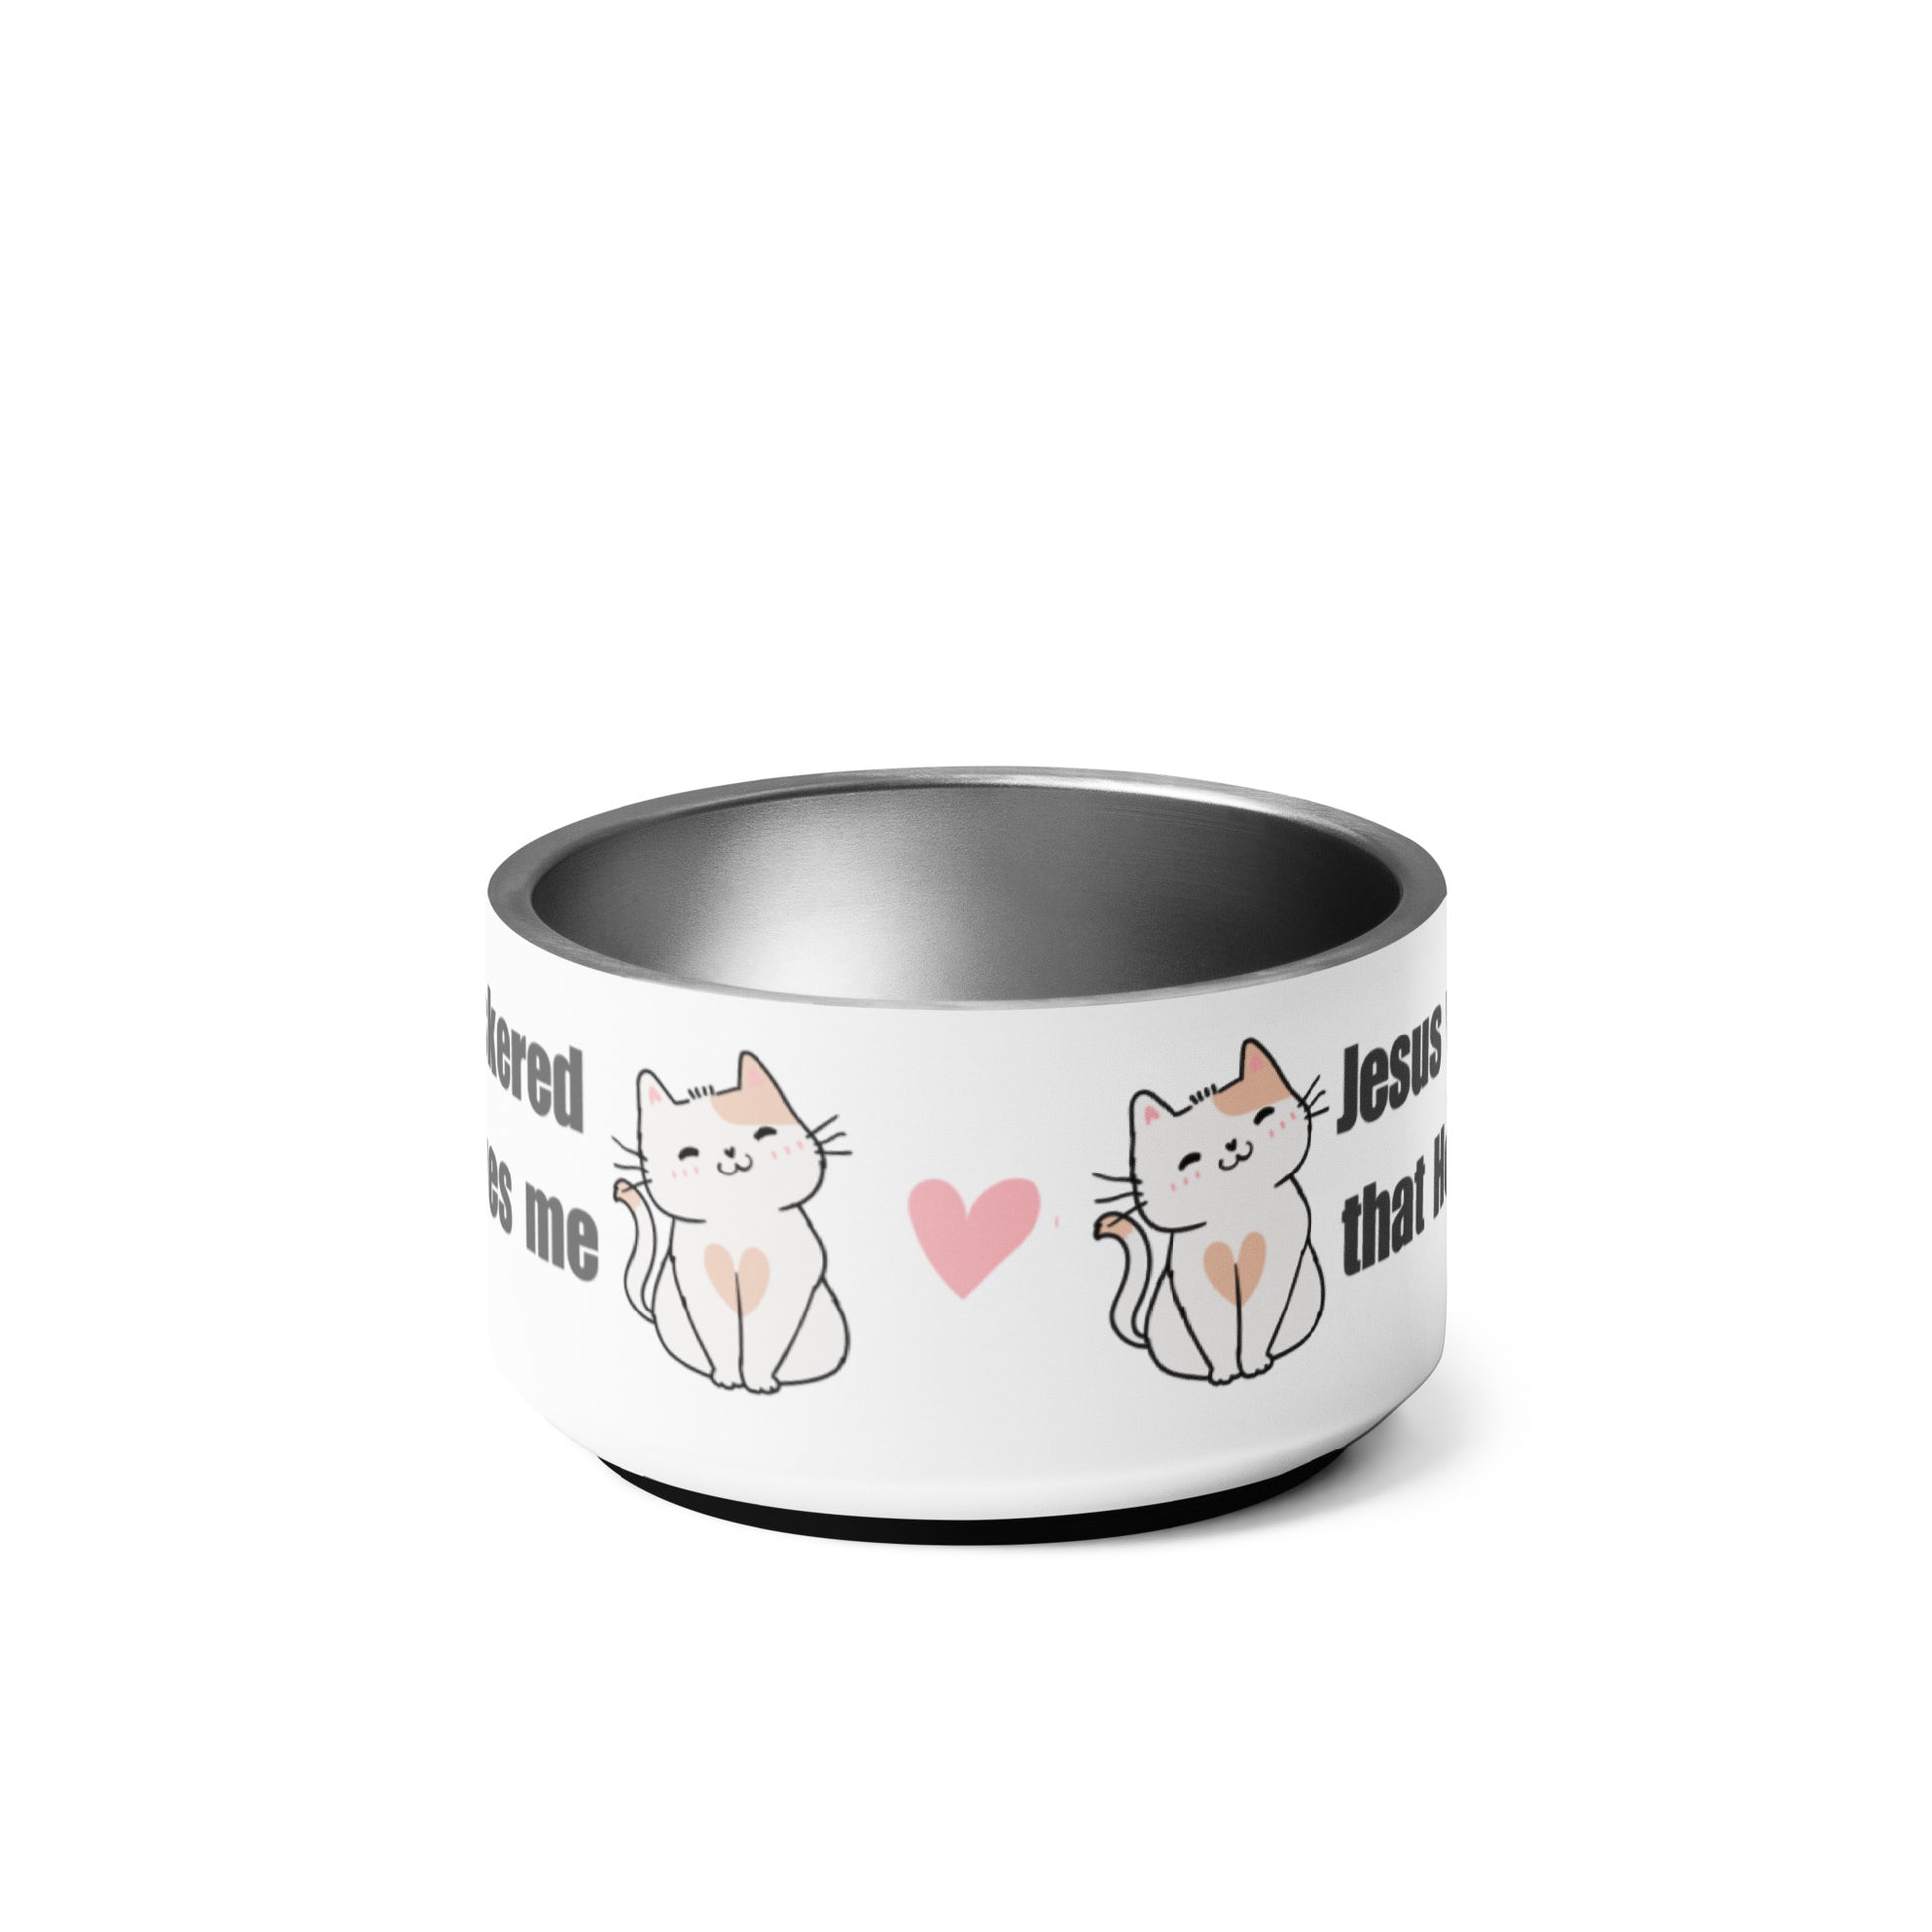 Stainless steel cat bowl on a plain white background and you can see some words and two cats and a pink heart on a white background on the sides of the dish.